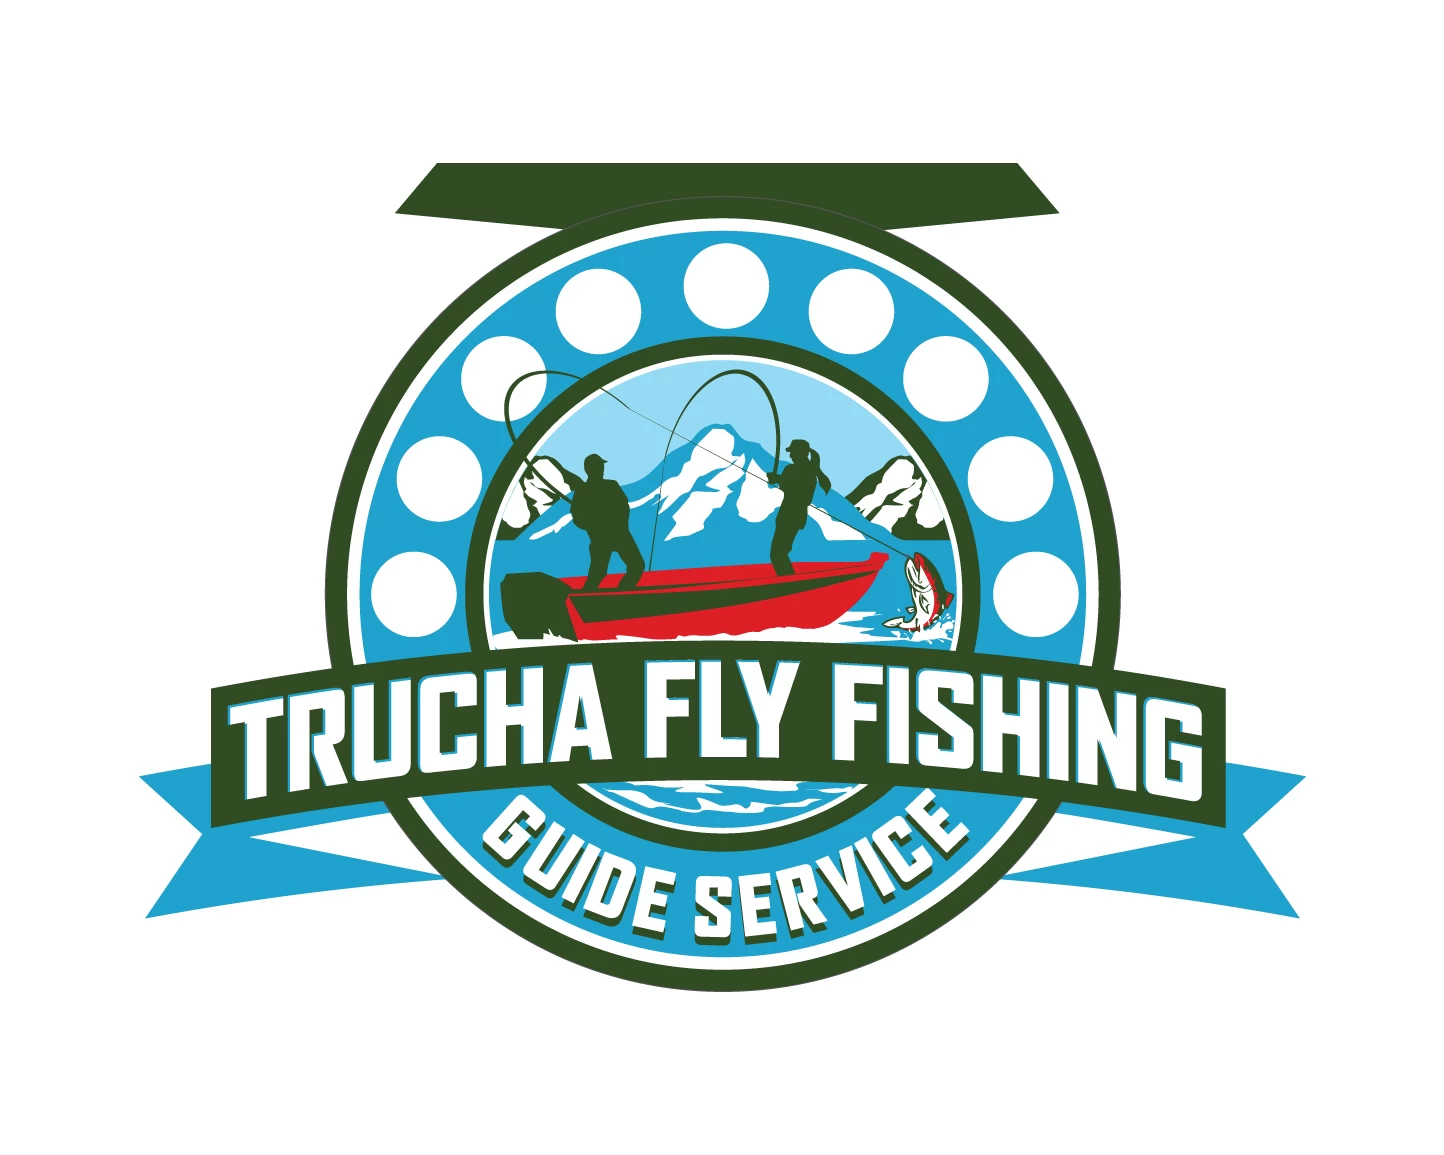 Design a logo for a hat - fly fishing related, Logo design contest